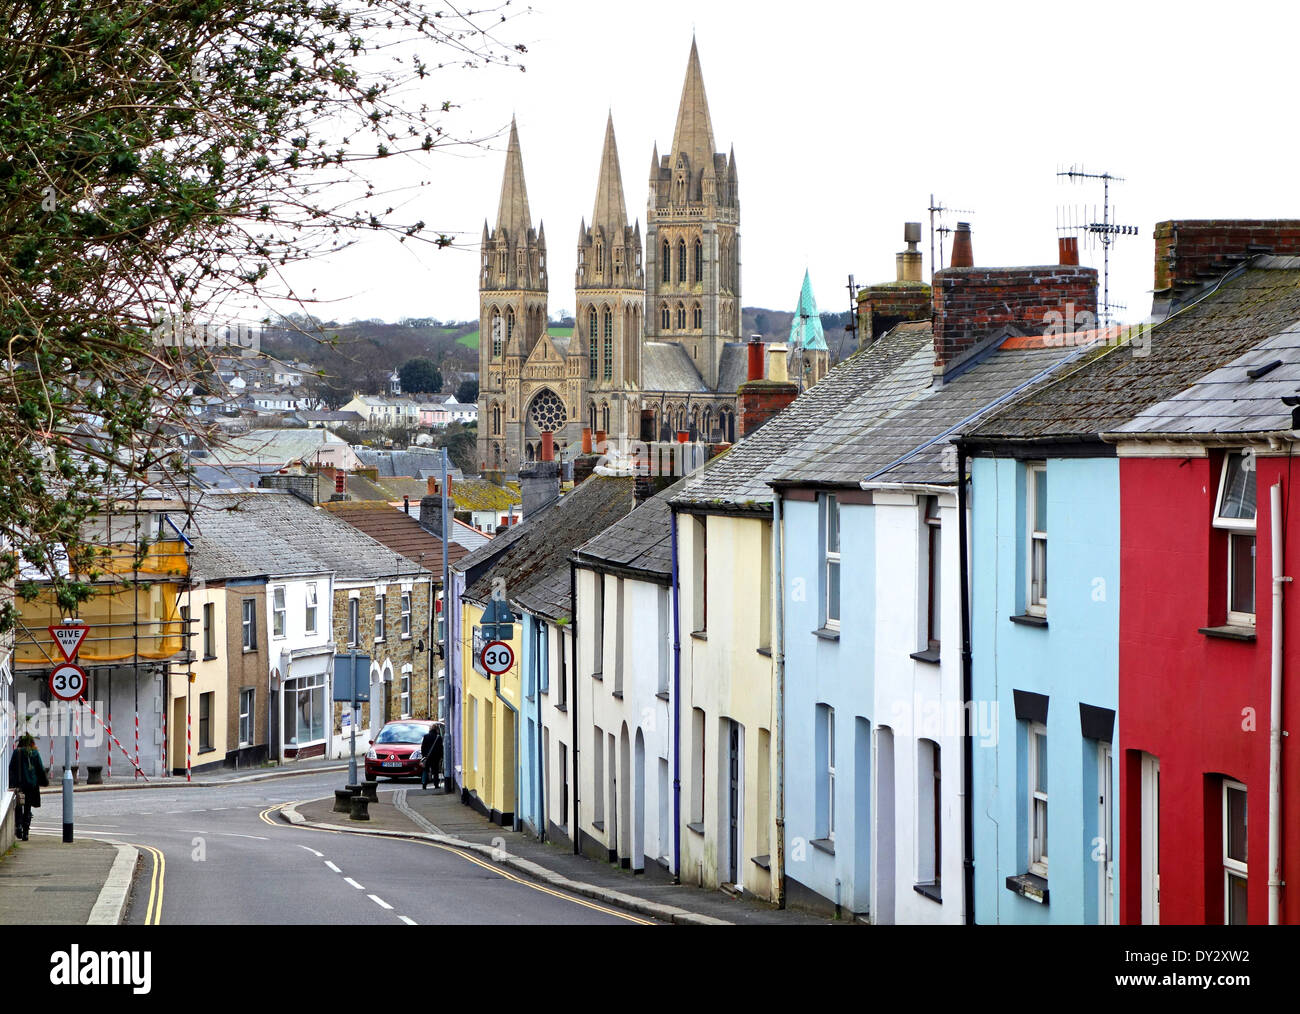 The city of Truro in Cornwall, UK Stock Photo